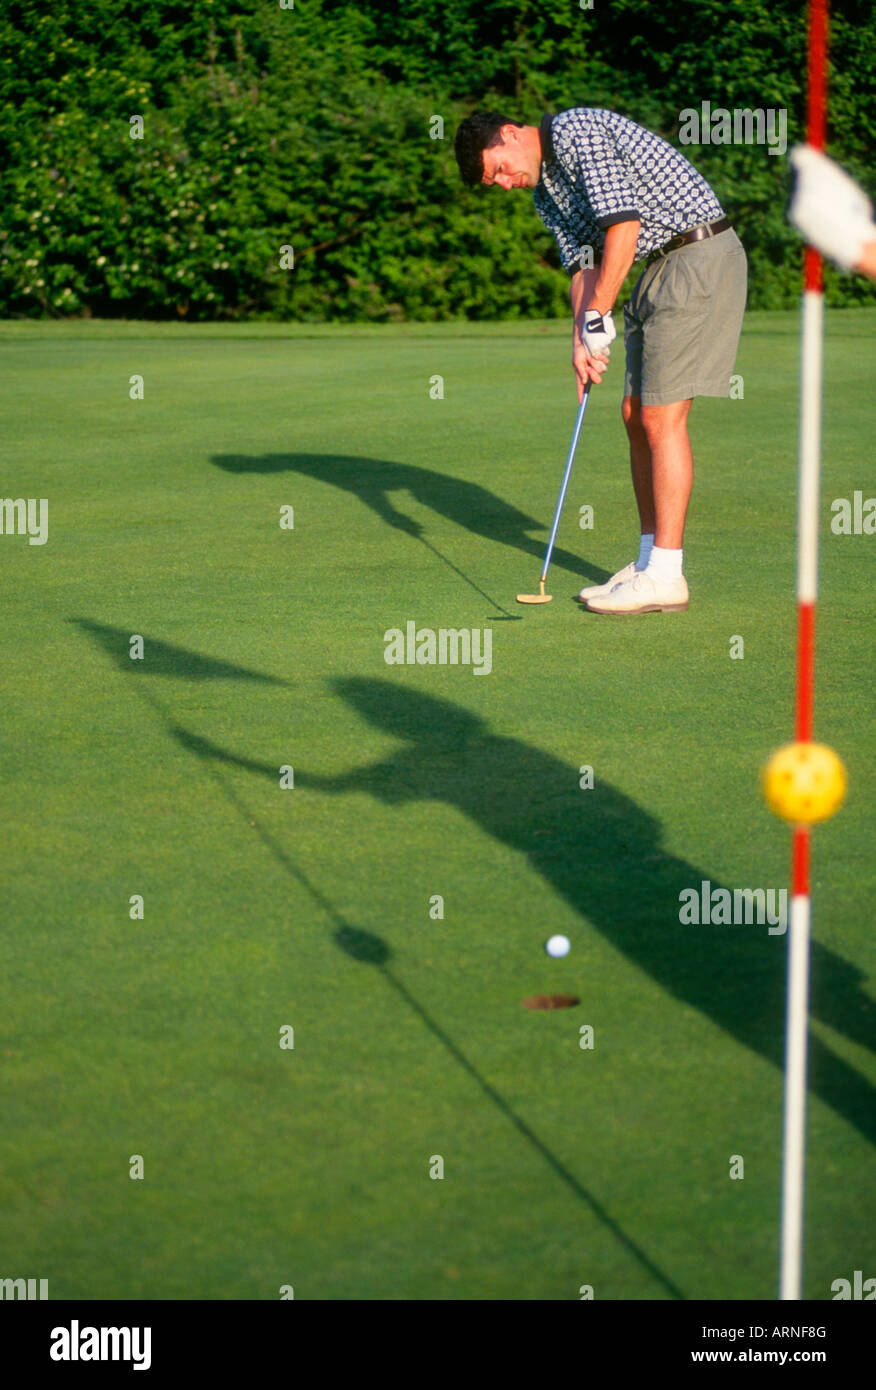 athletic 20 something golfer putts ball, shadow of partner on grass, Victoria, Vancouver Island, British Columbia, Canada. Stock Photo